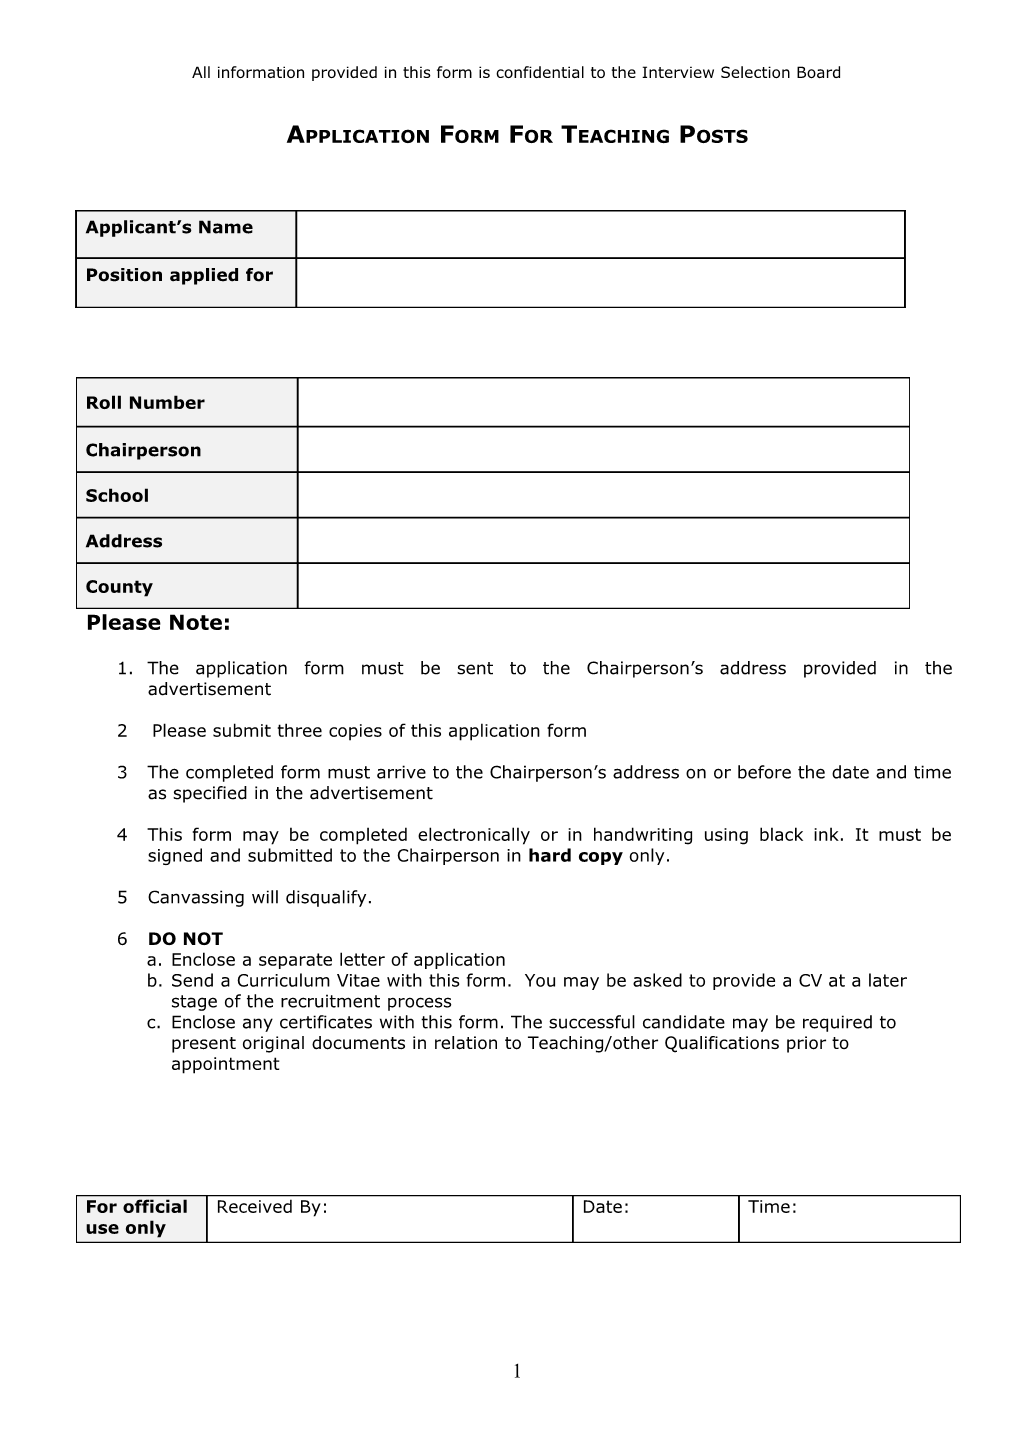 All Information Provided in This Form Is Confidential to the Interview Selection Board